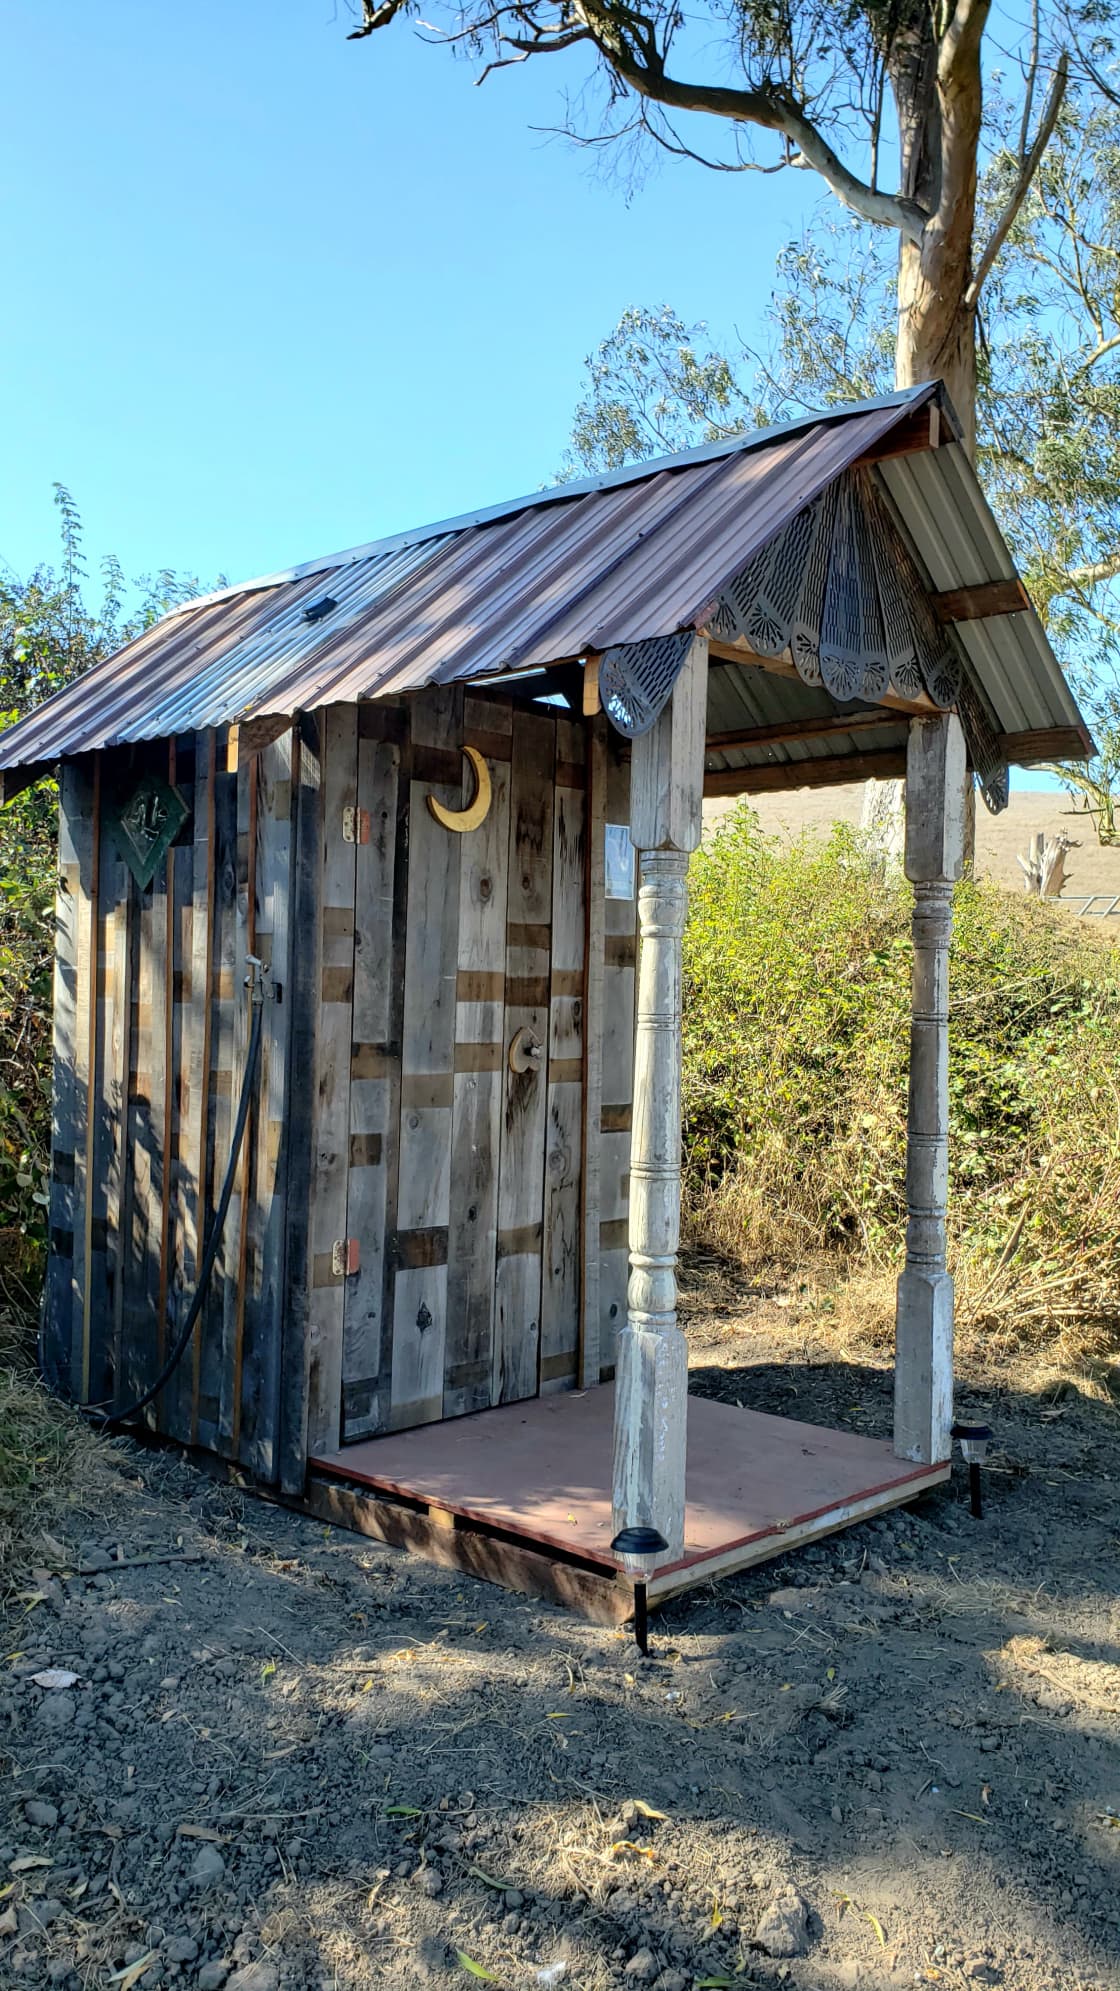 The cutest outhouse! 